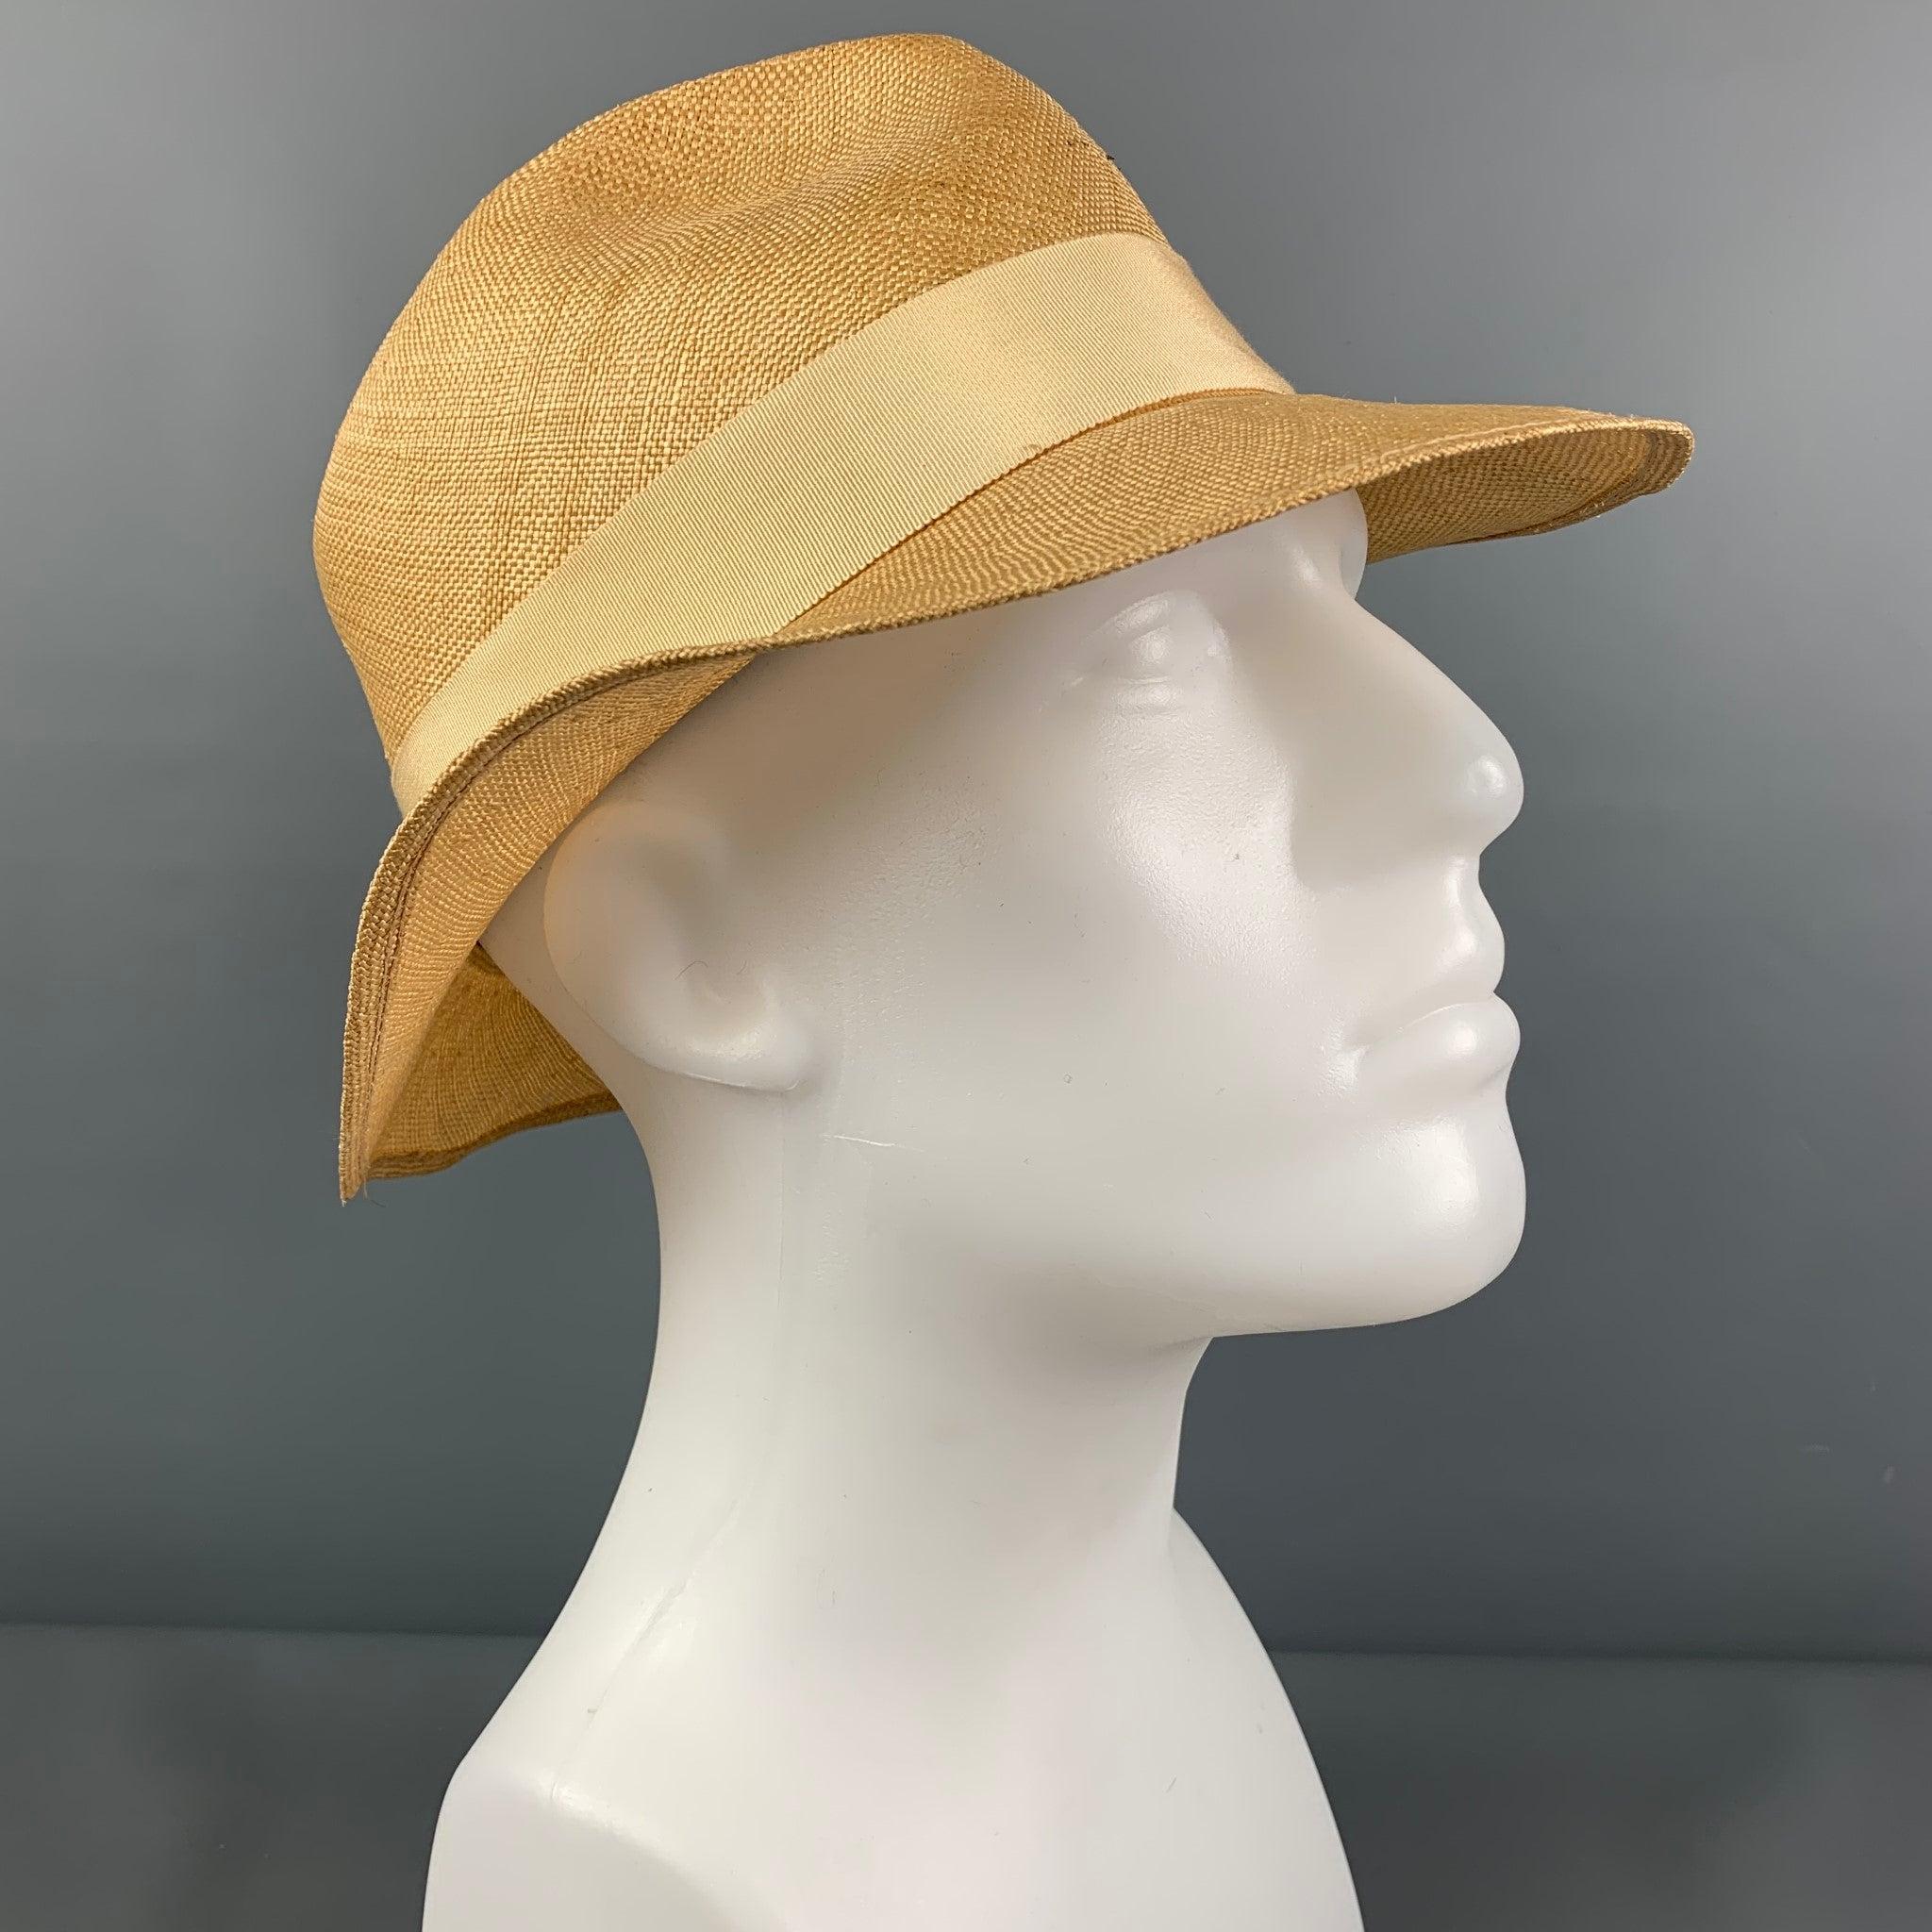 Vintage PAUL STUART hat comes in a beige straw material featuring a fedora style and a beige ribbon trim.
Very Good
Pre-Owned Condition. Fabric tag removed.  

Marked:   Size tag removed 

Measurements: 
  Opening: 22 inches  Brim: 2.75 inches 